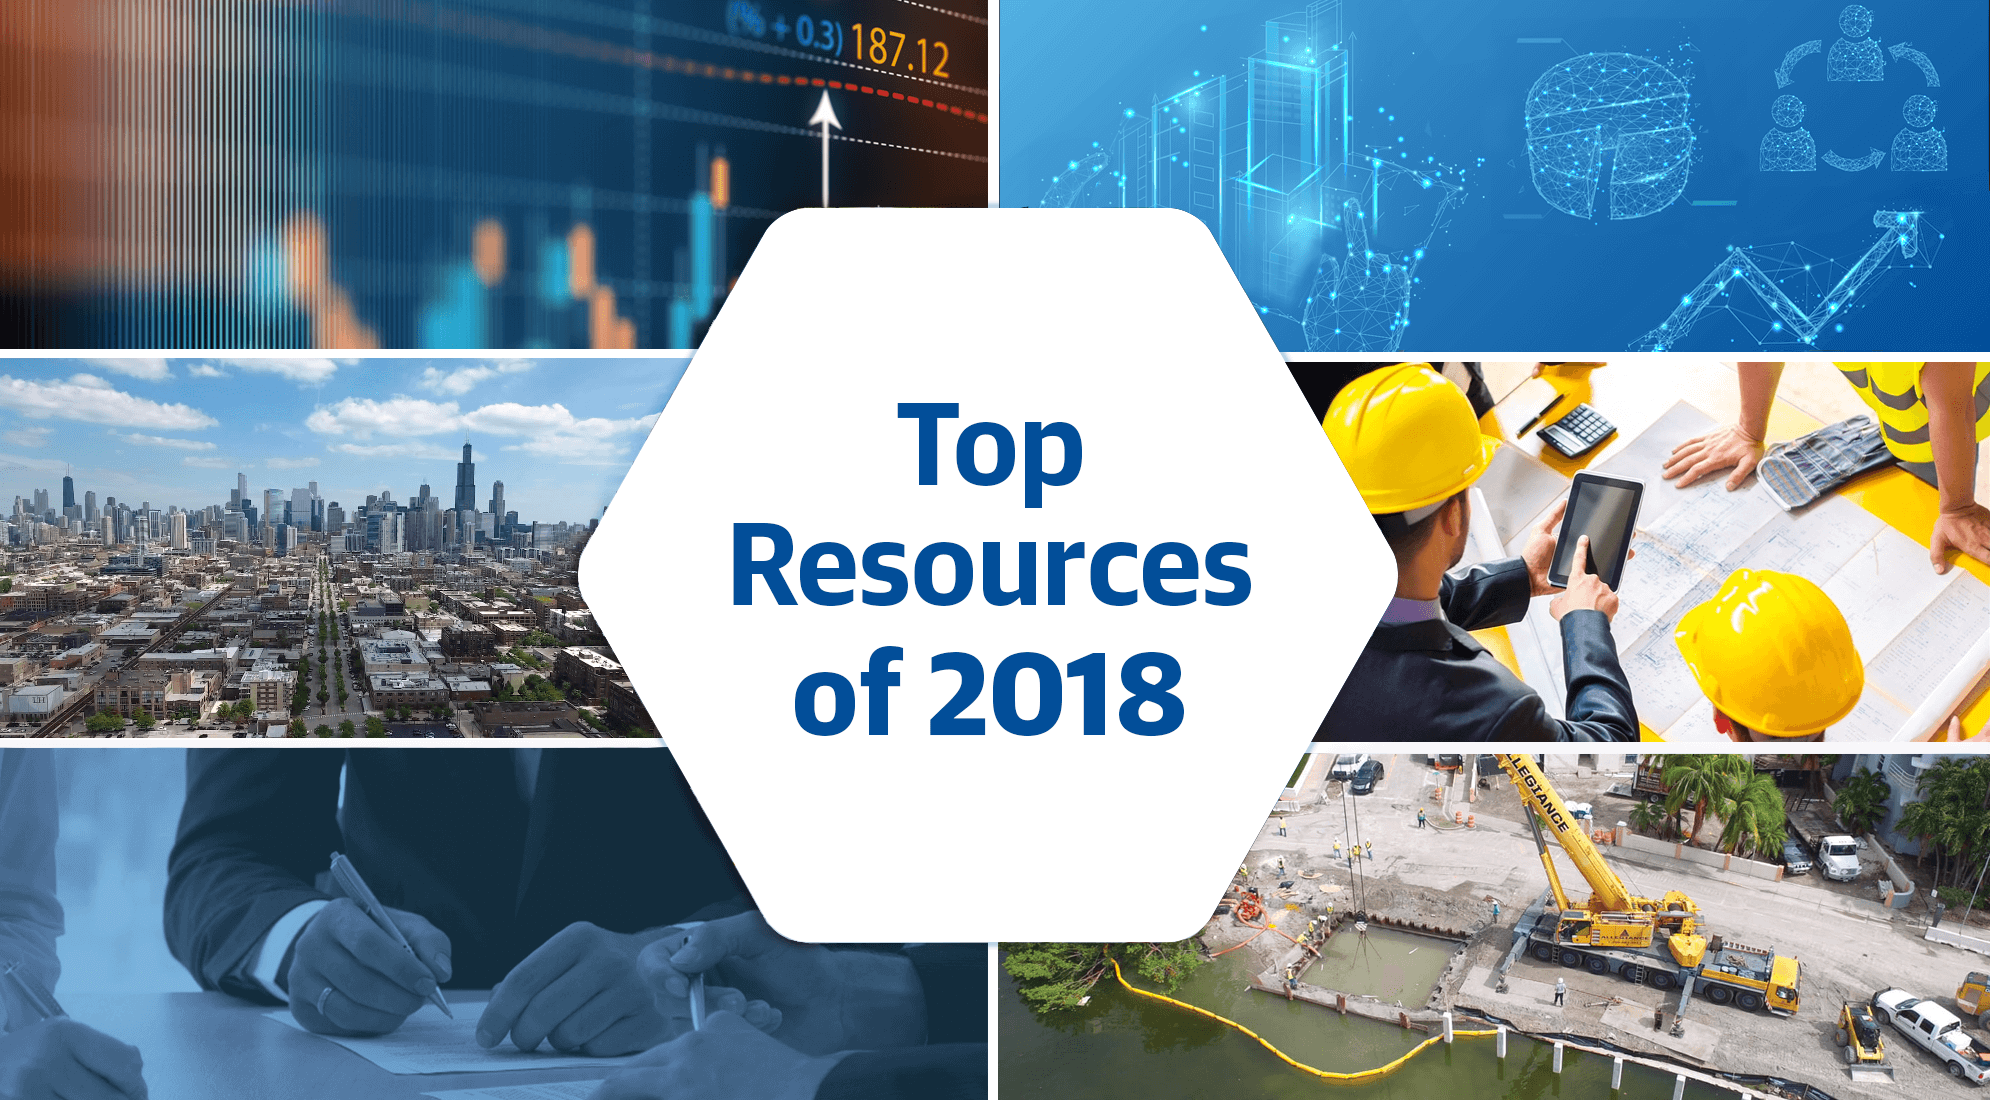 Top Resources of 2018: Building Insights